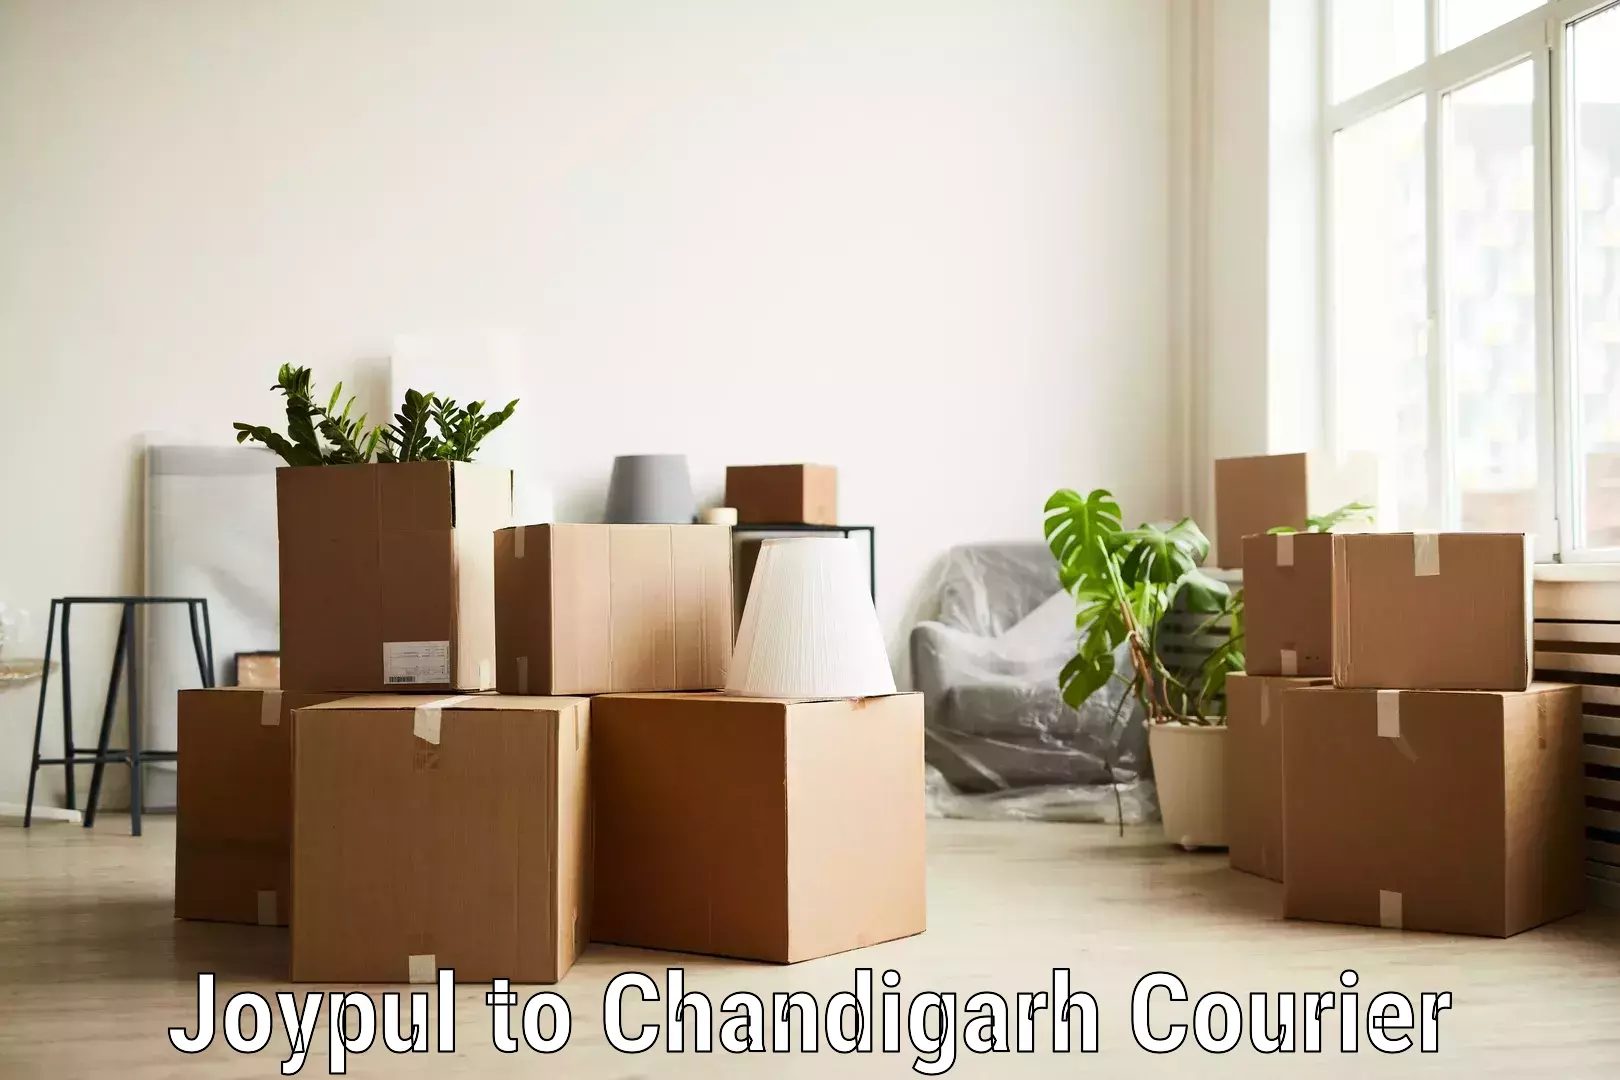 Professional parcel services in Joypul to Chandigarh